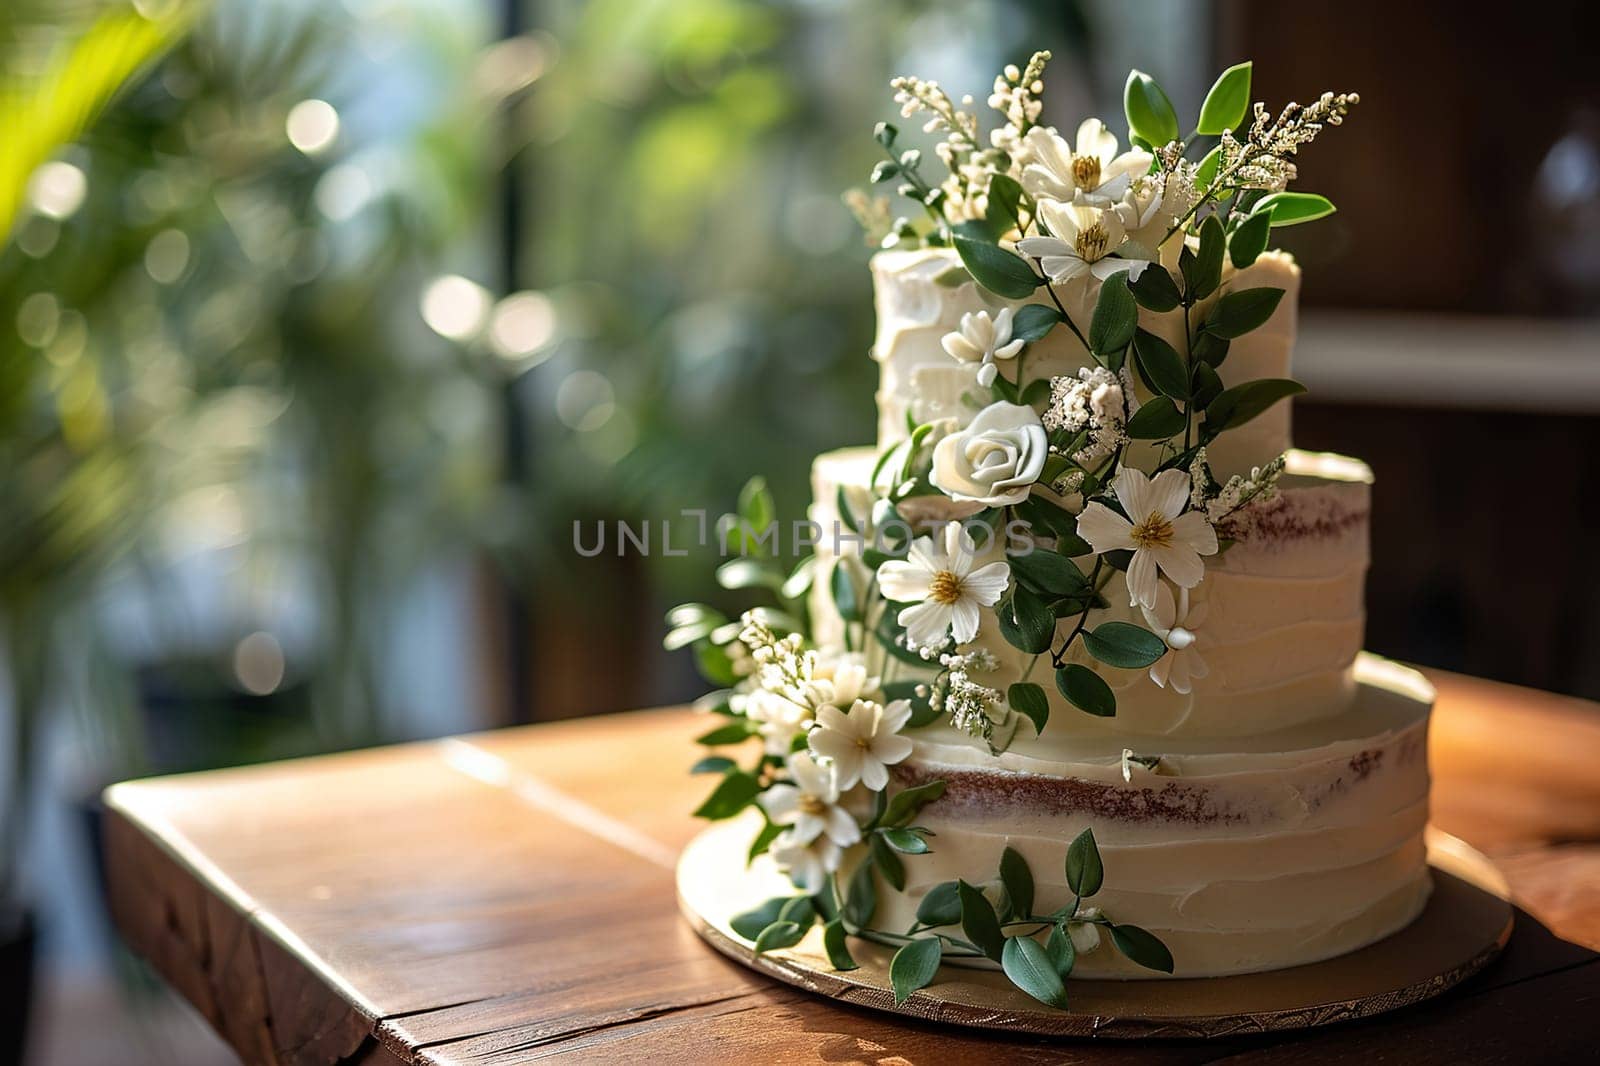 Elegant white wedding cake four tiers high and decorated with flowers.